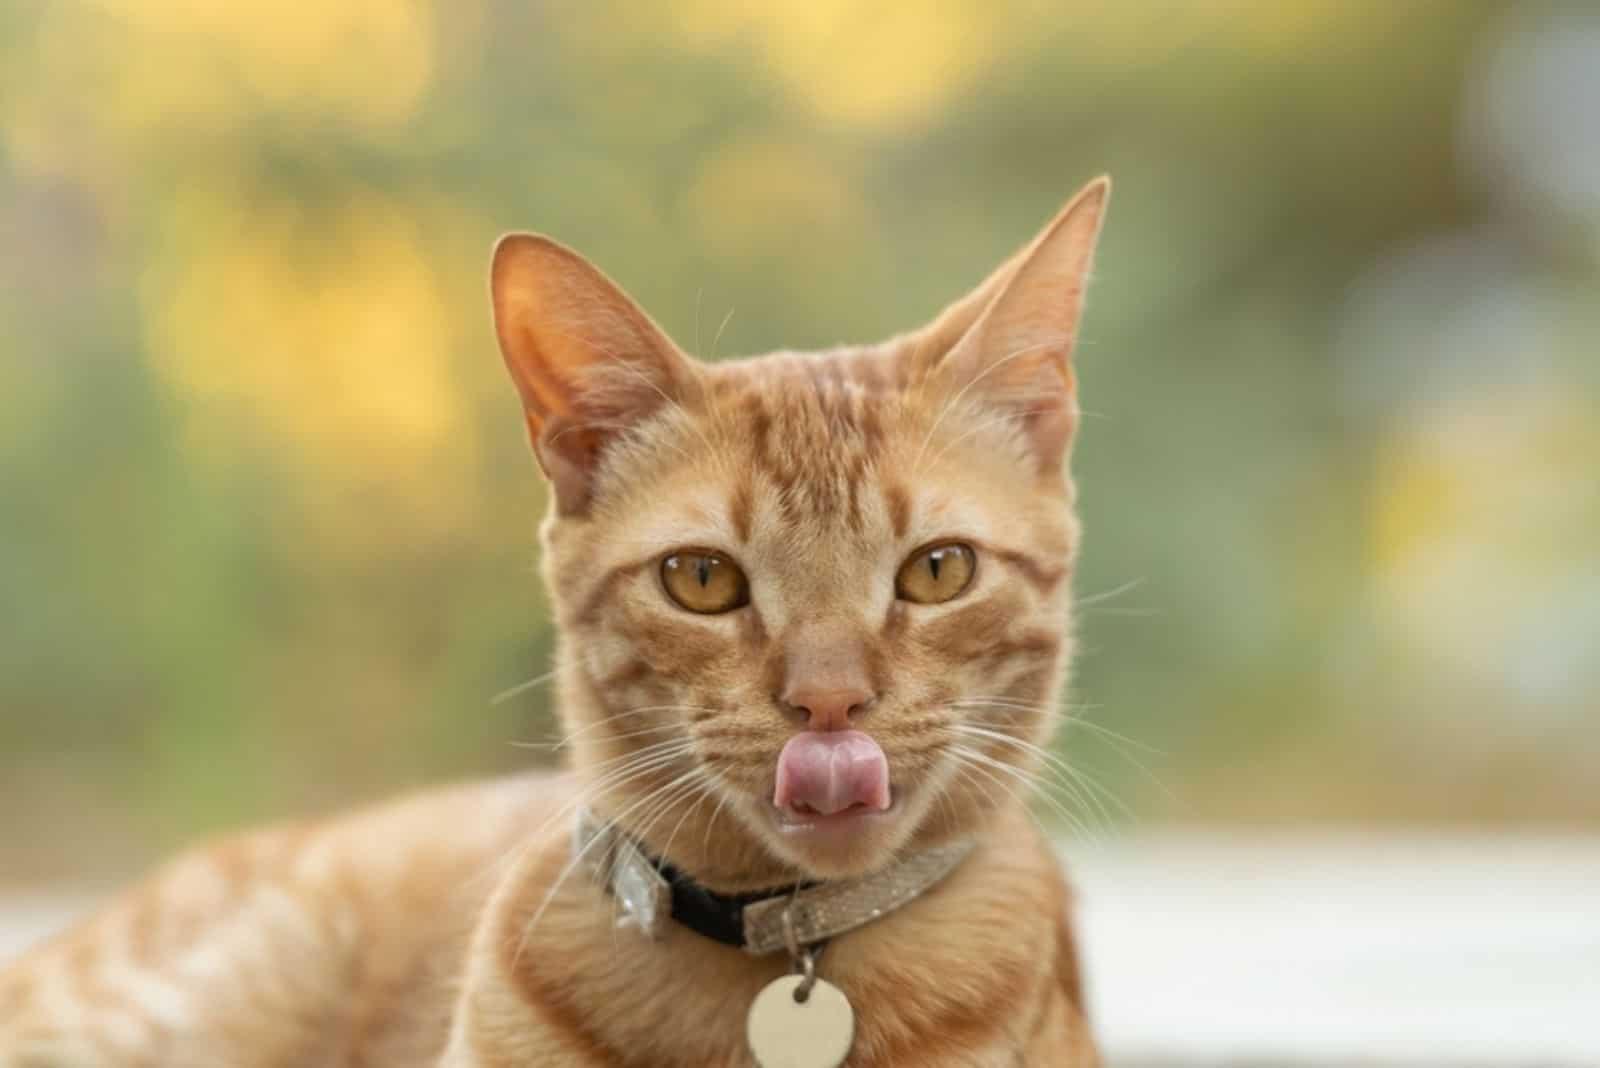 Funny portrait of a ginger cat with tongue out